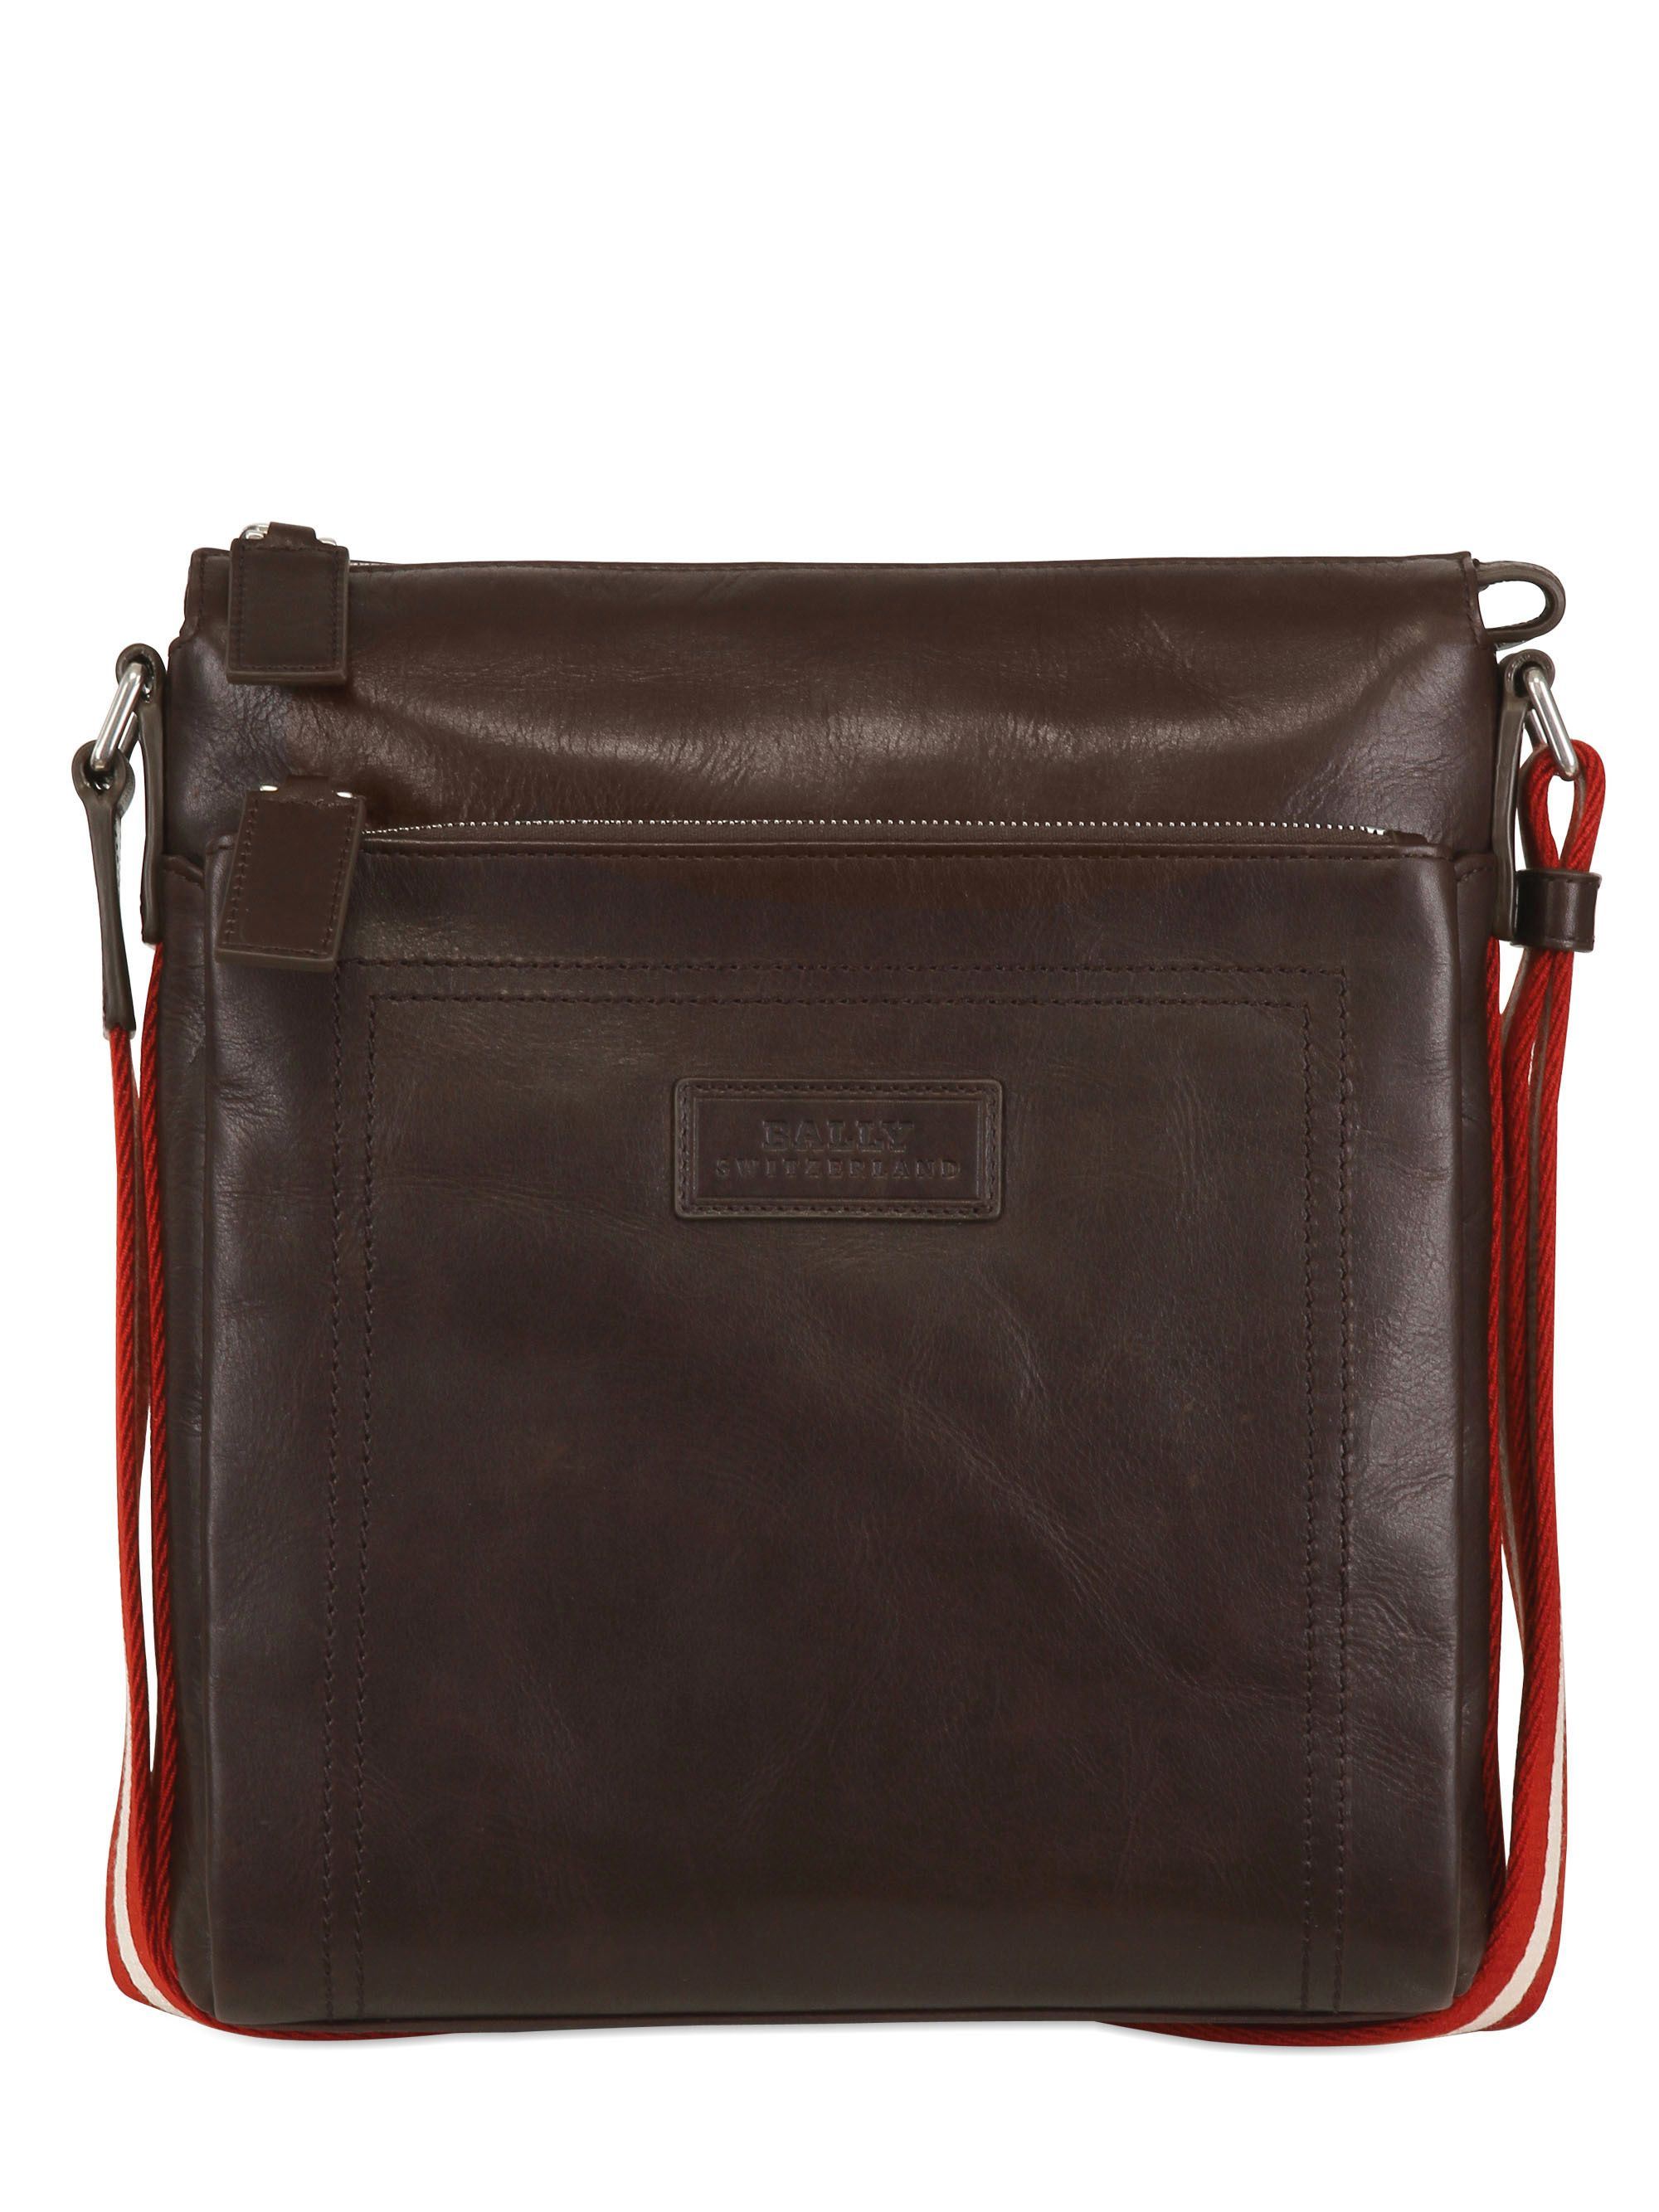 Lyst - Bally Leather Crossbody Bag in Brown